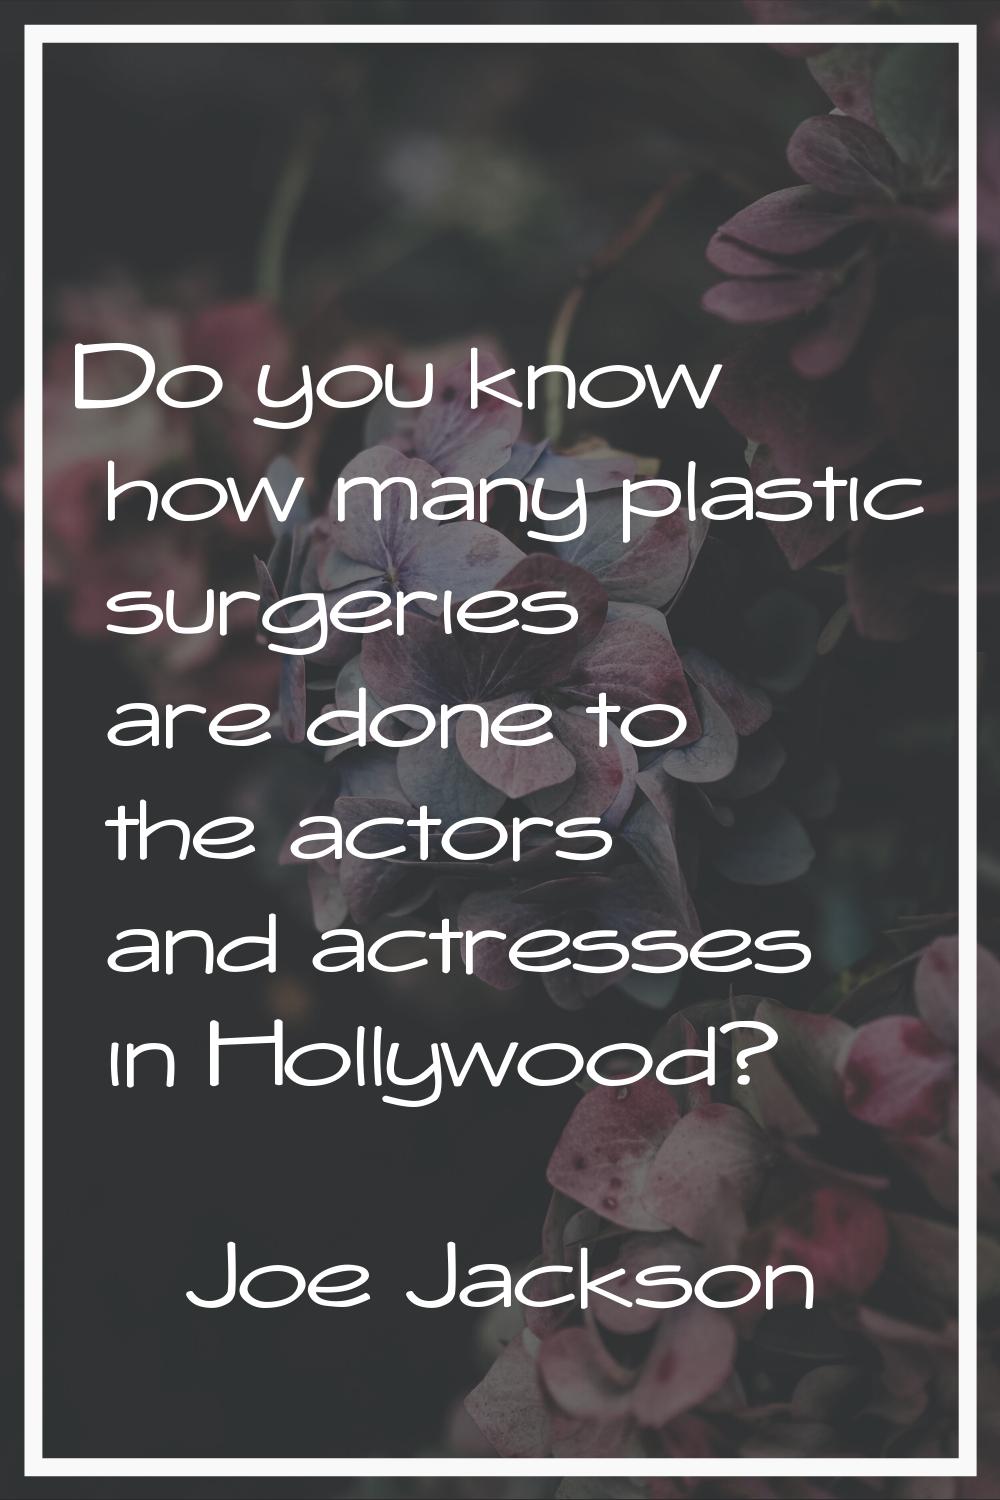 Do you know how many plastic surgeries are done to the actors and actresses in Hollywood?